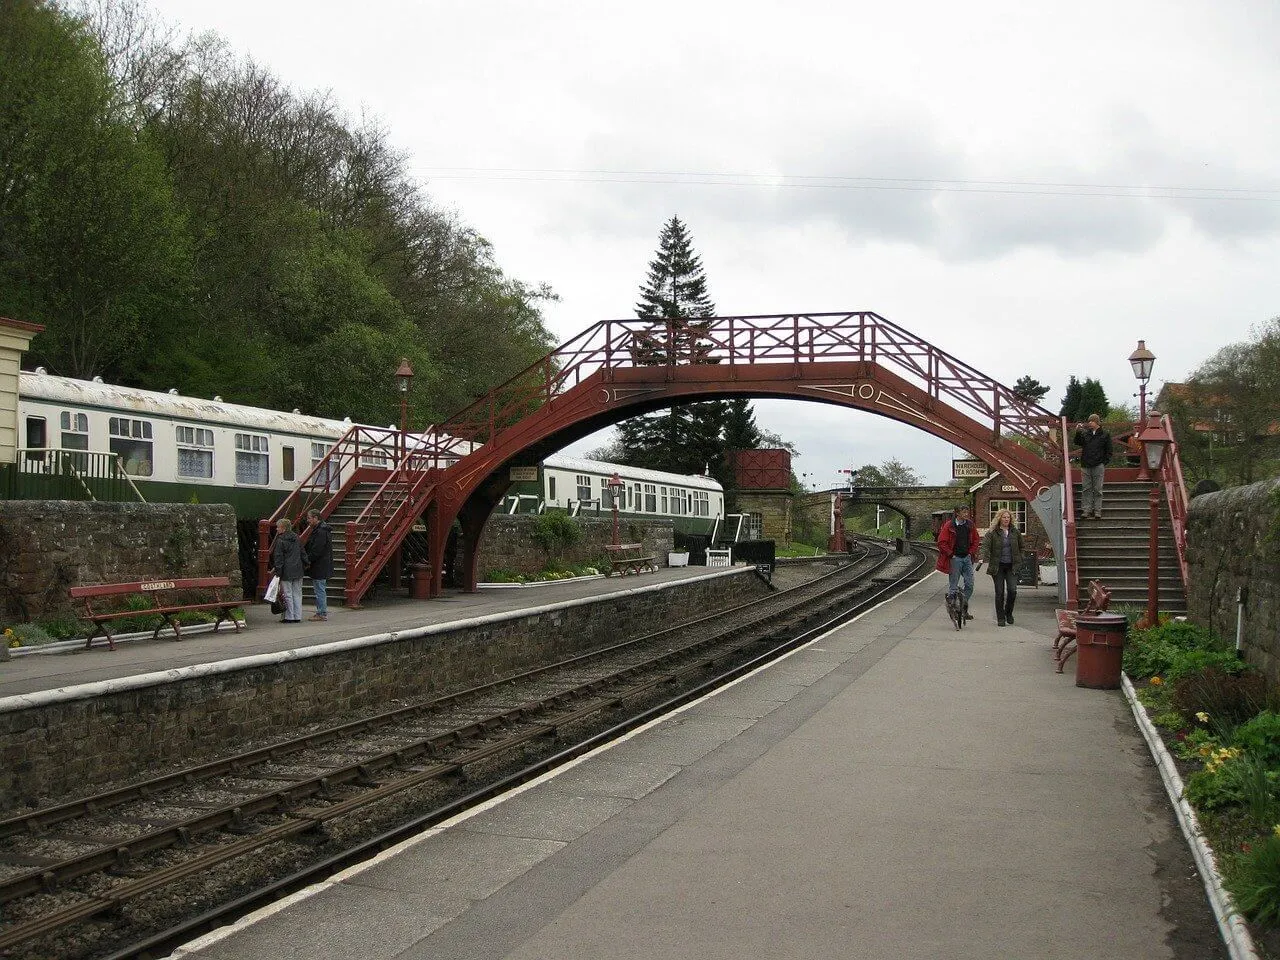 North Yorkshire railway for families